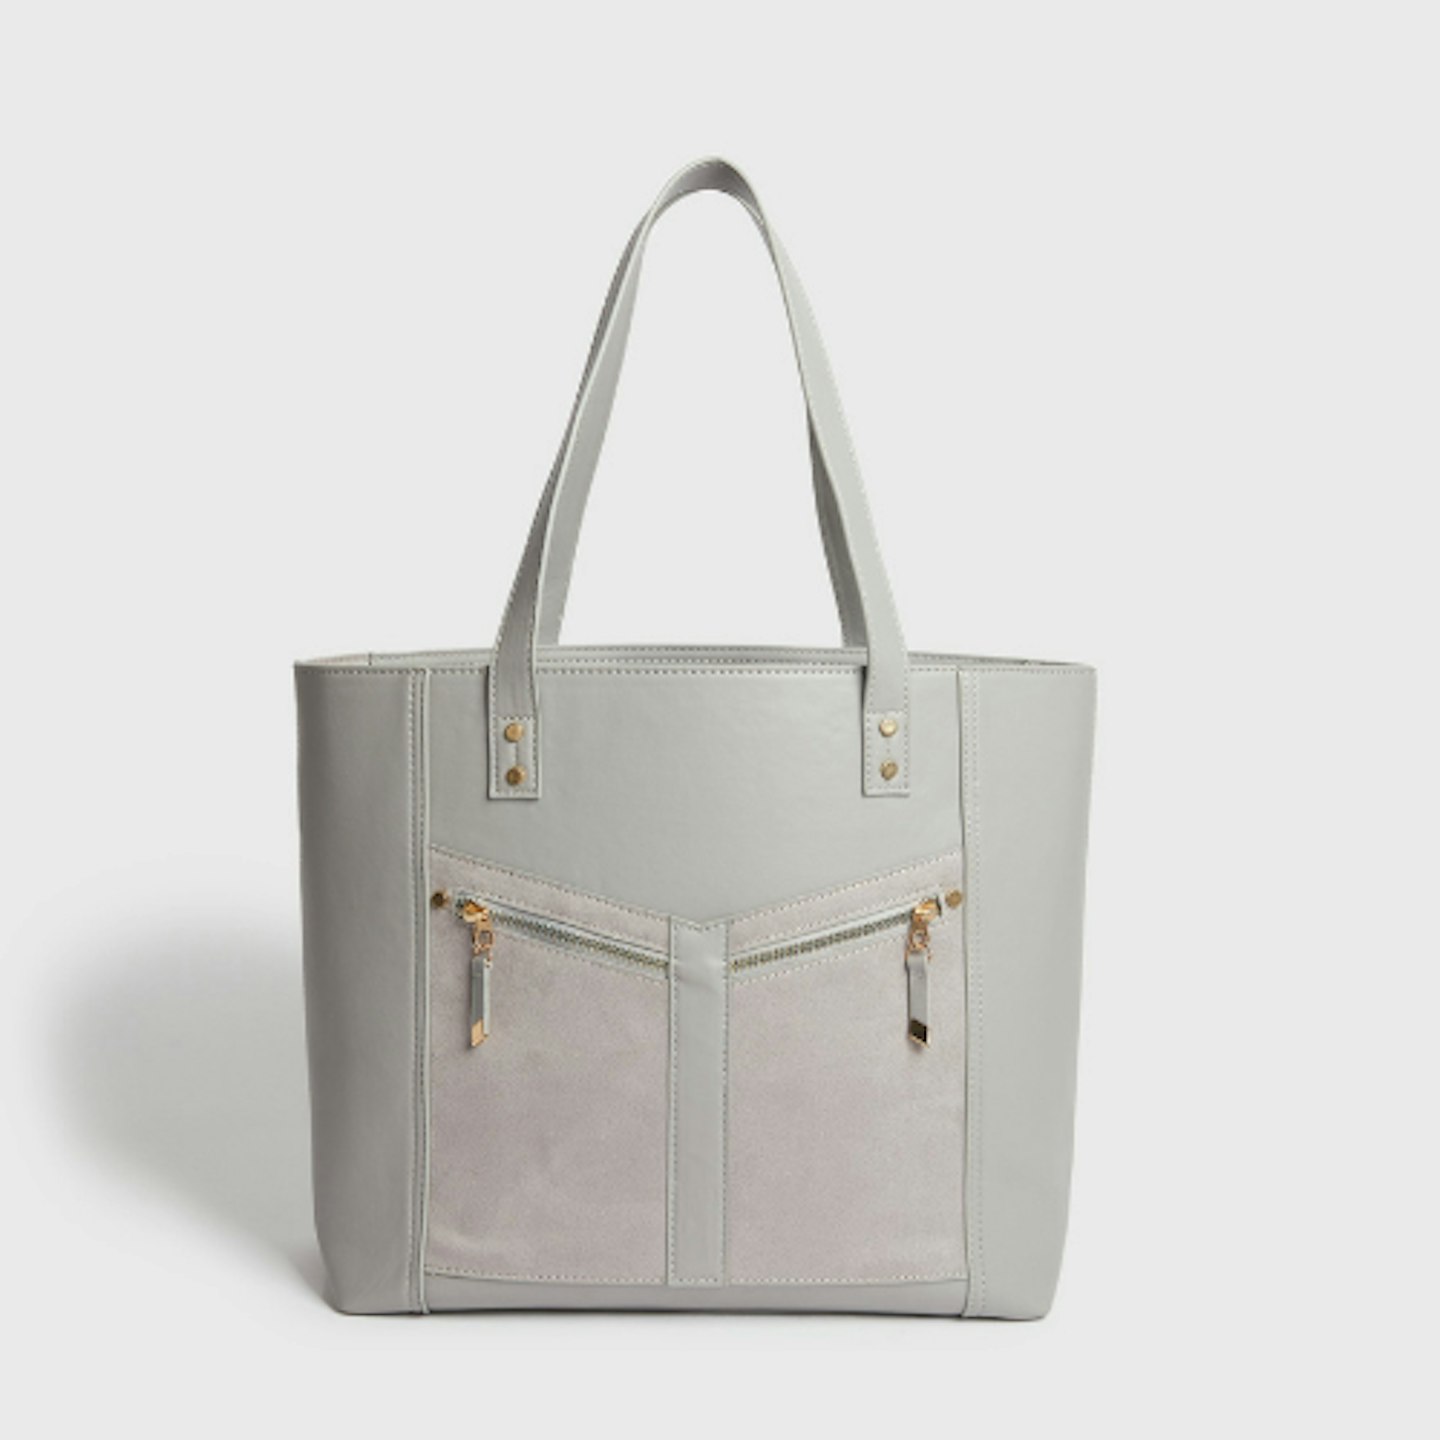 Grey tote bag on a white background